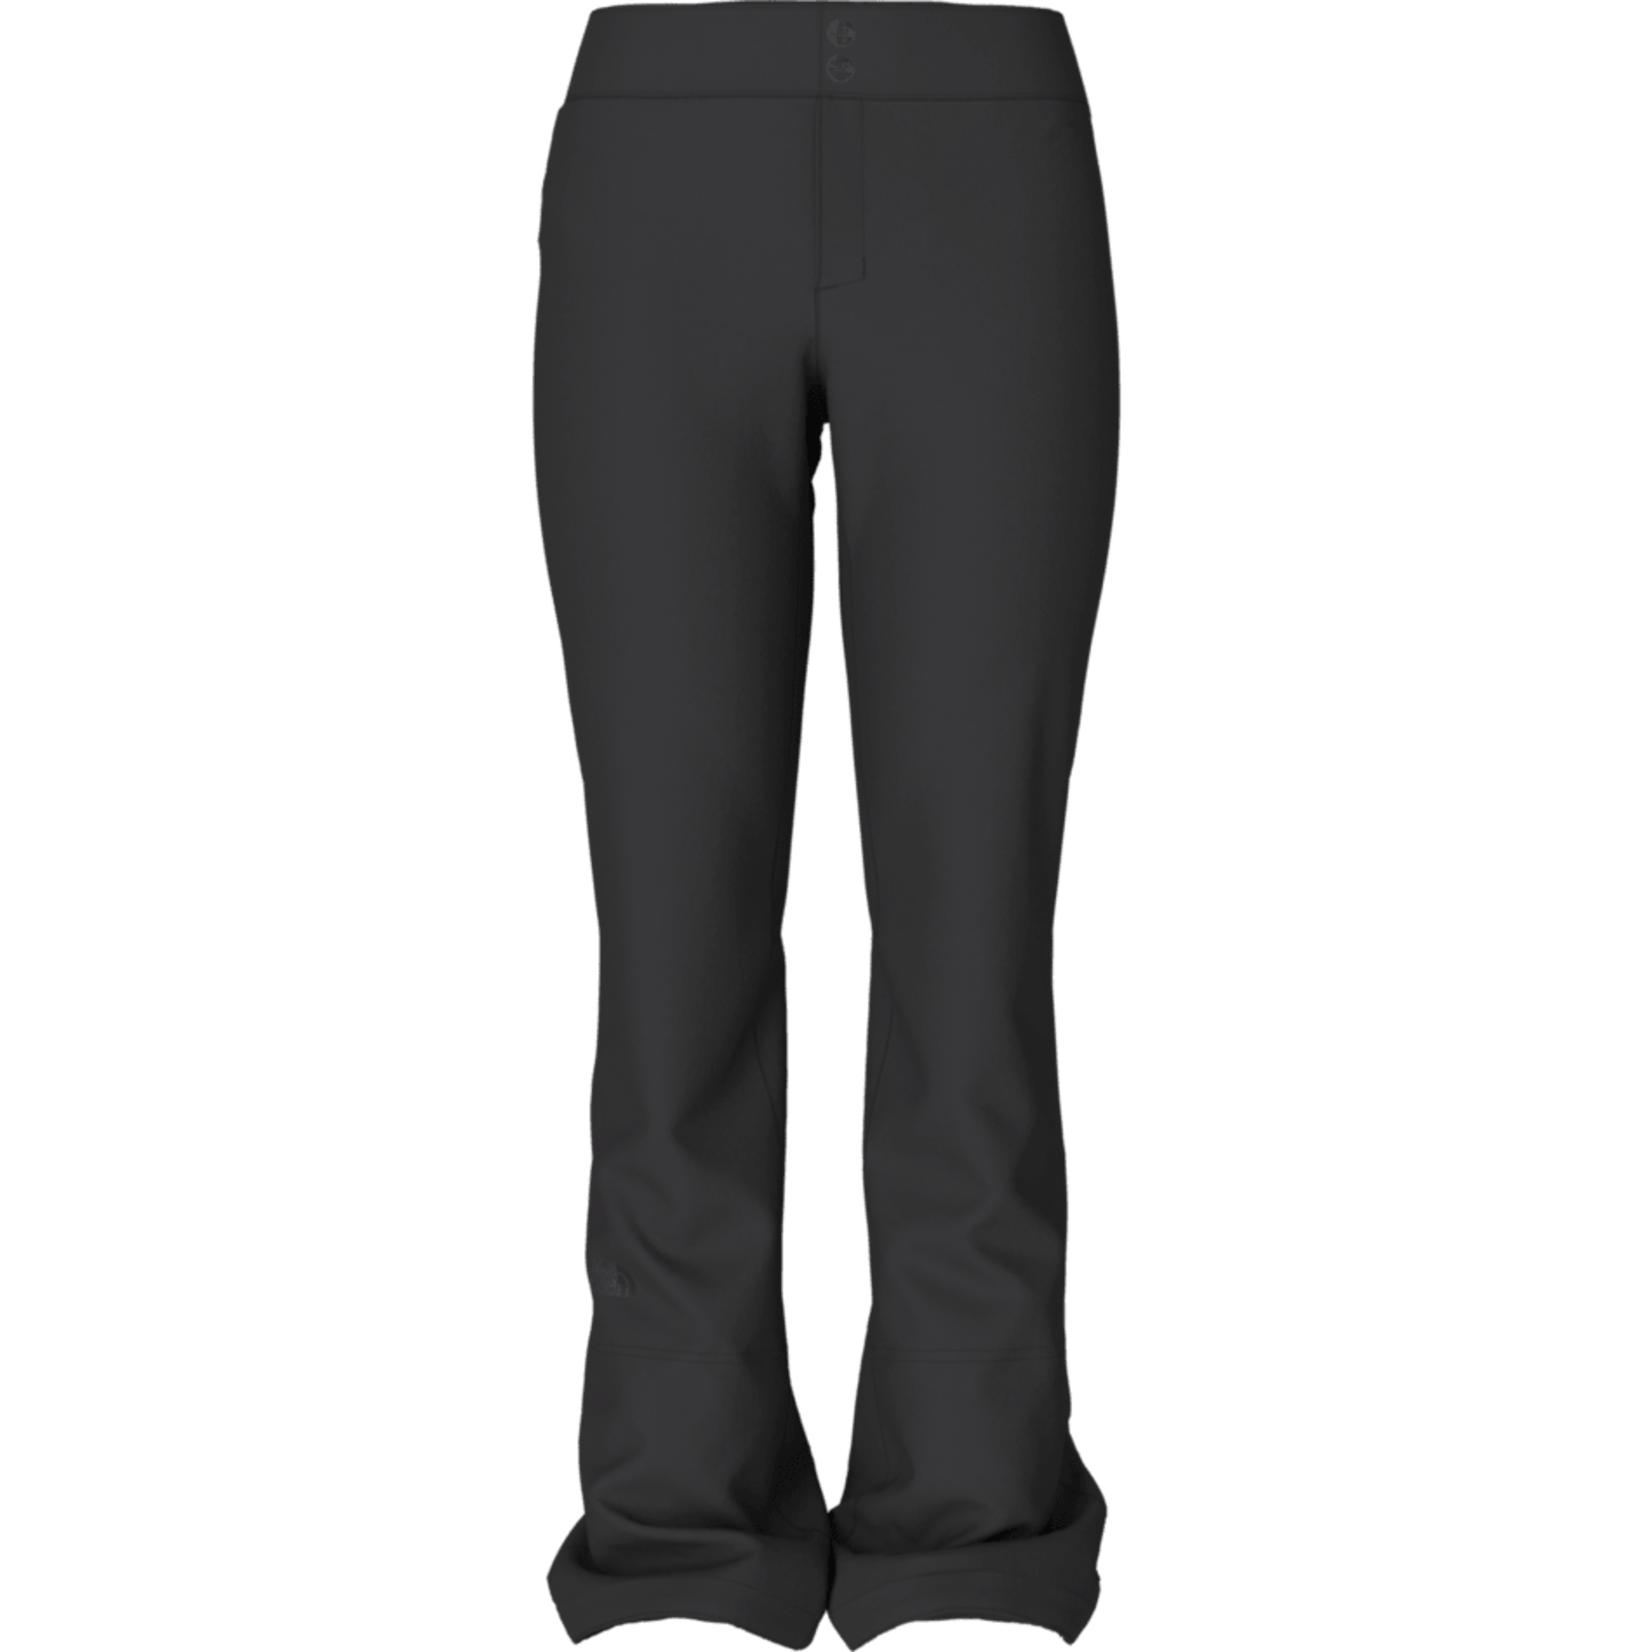 NEW The North Face Apex Sth Pant Women's Black Ski Snow Fitted